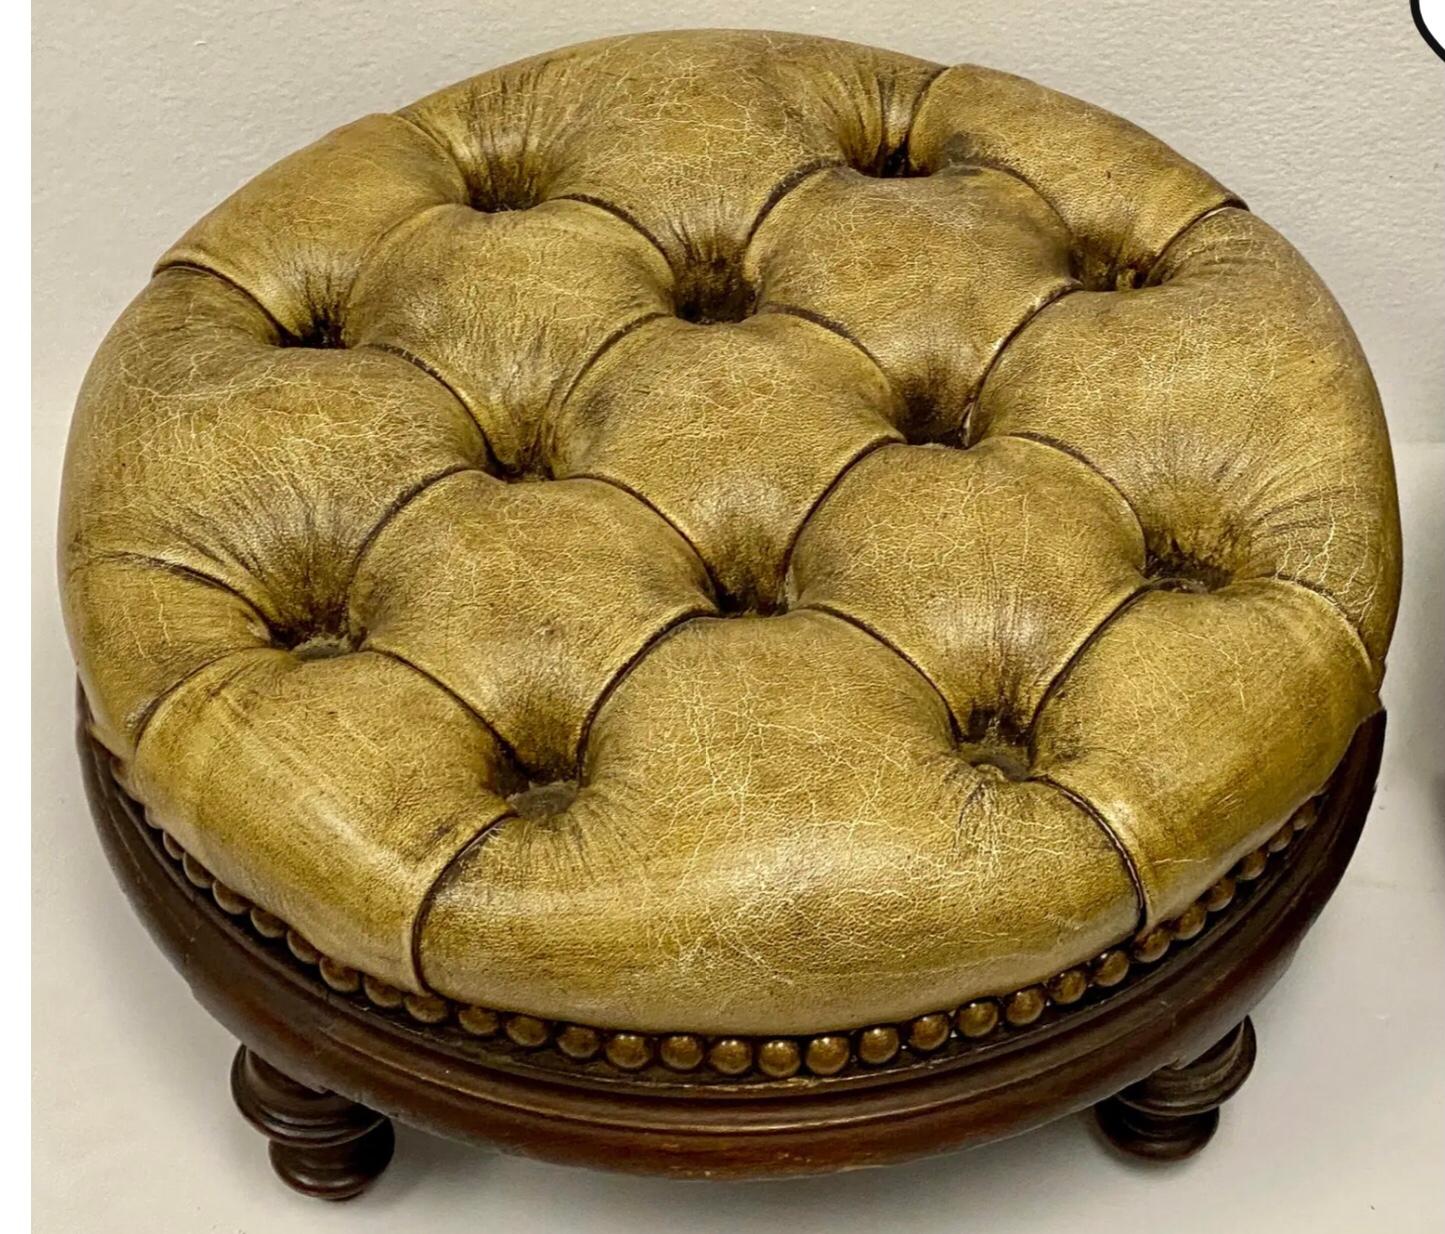 European Early English Tufted Gold Leather Chesterfield Ottomans, a Pair For Sale